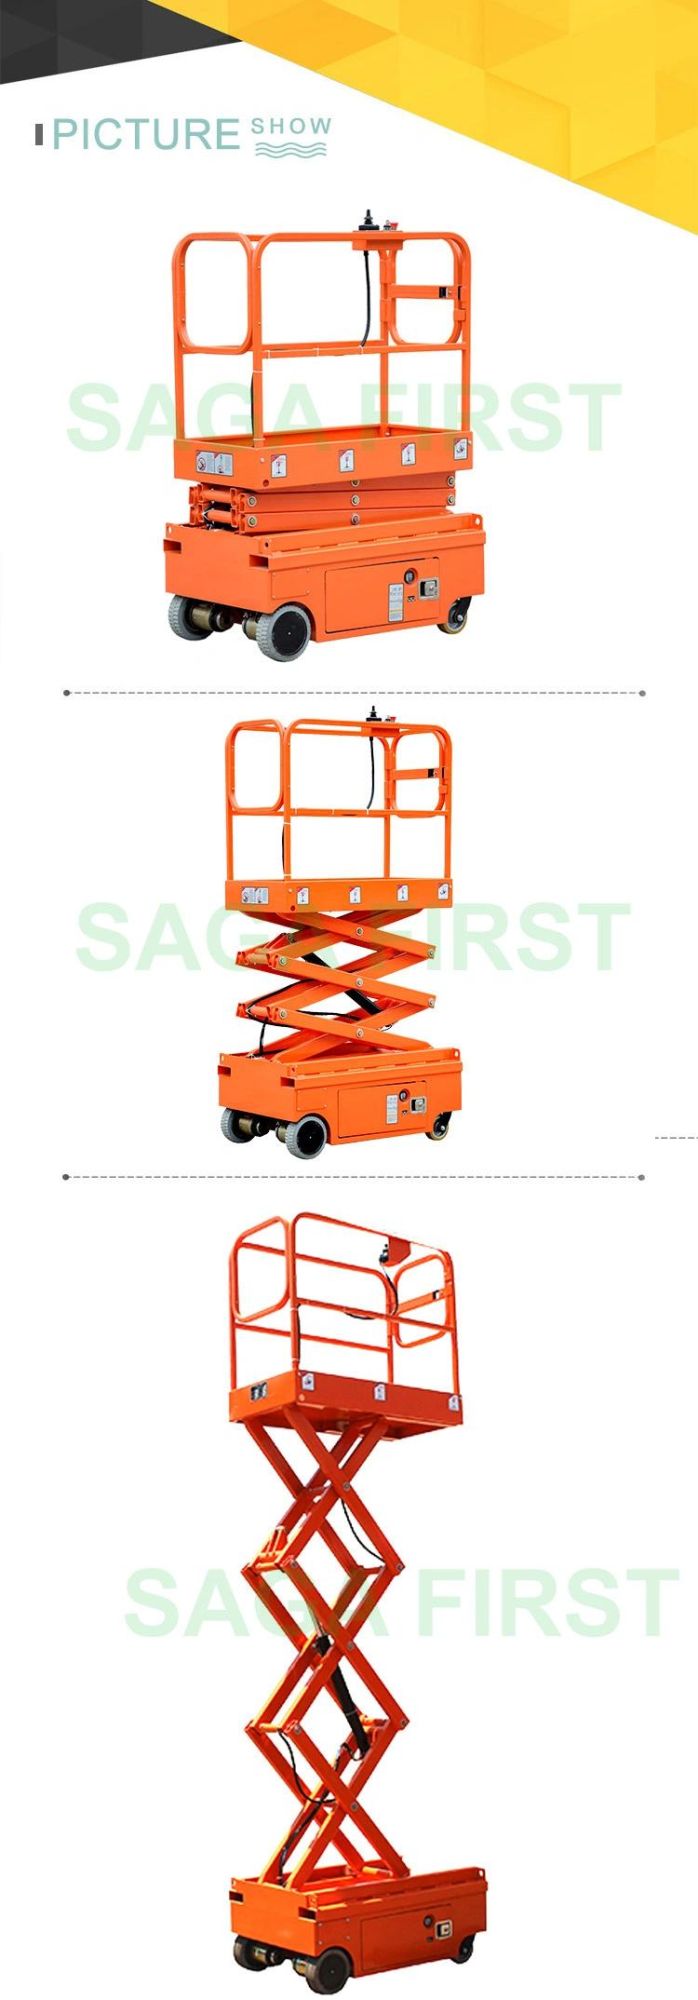 3m 3.9m Electric Mobile Portable Small Self Propelled Scissor Lift